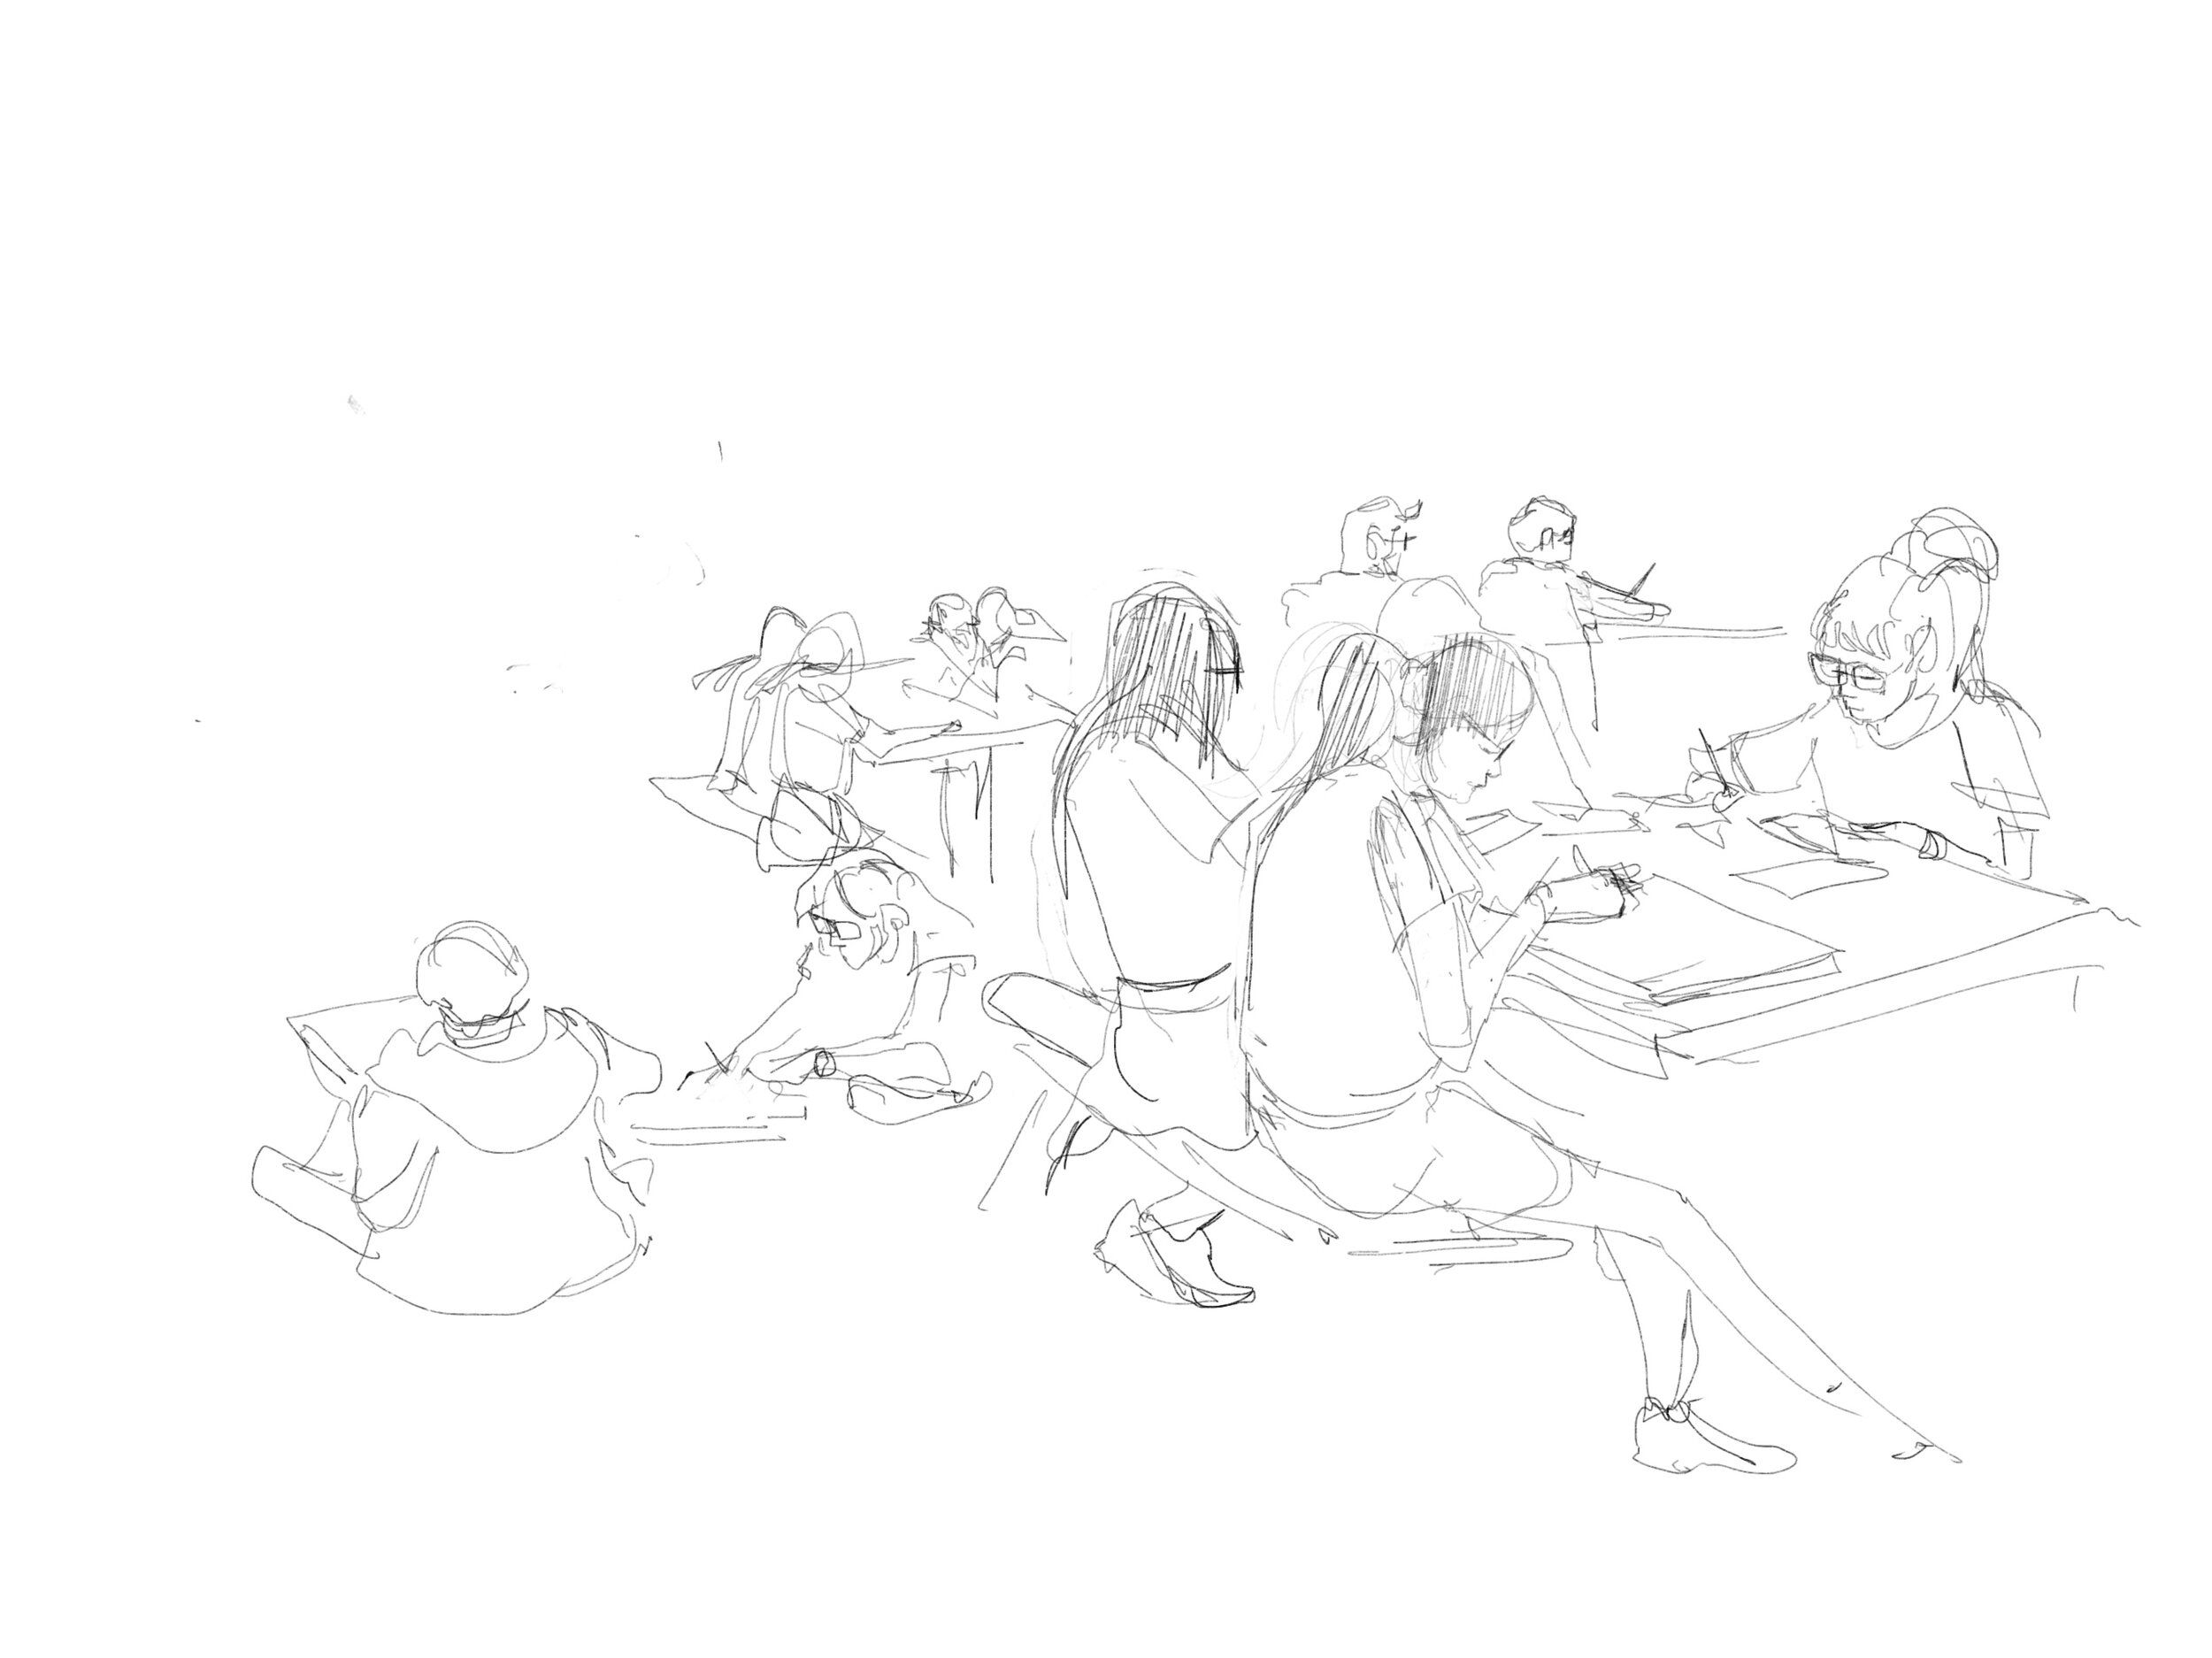  I been put in charged of the school’s visual Arts CCA. Rather than make everything  about “outcome” and “goals”, I structured it into an exploratory session with elements of “Play”. Here, the students are given the freedom to explore and Urban sketc